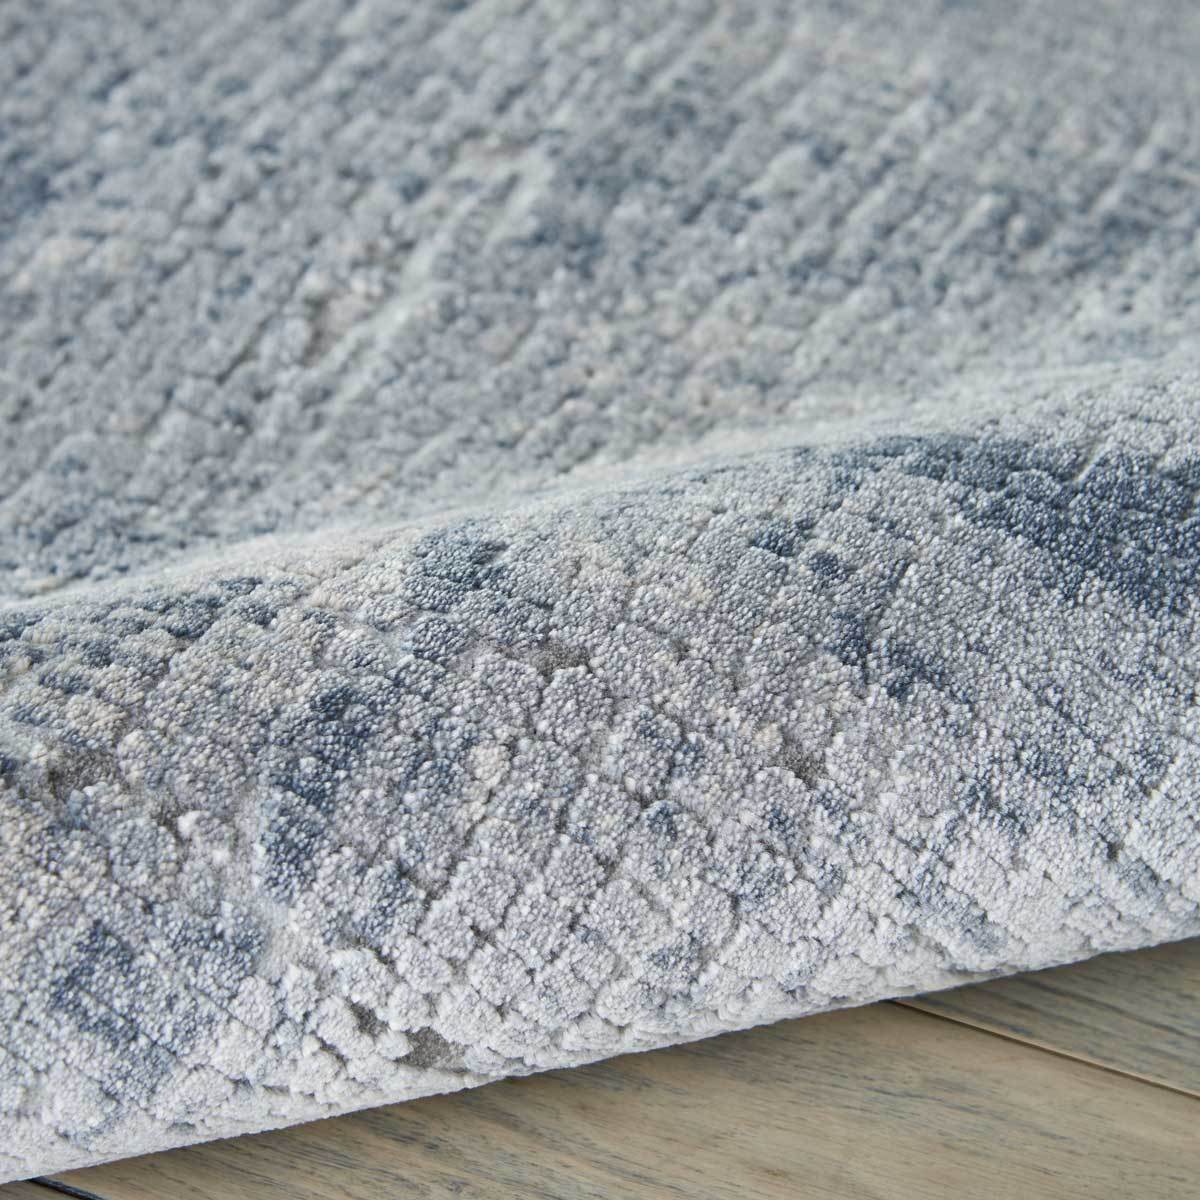 Rustic Textures Faded Blue Rug in 3 Sizes